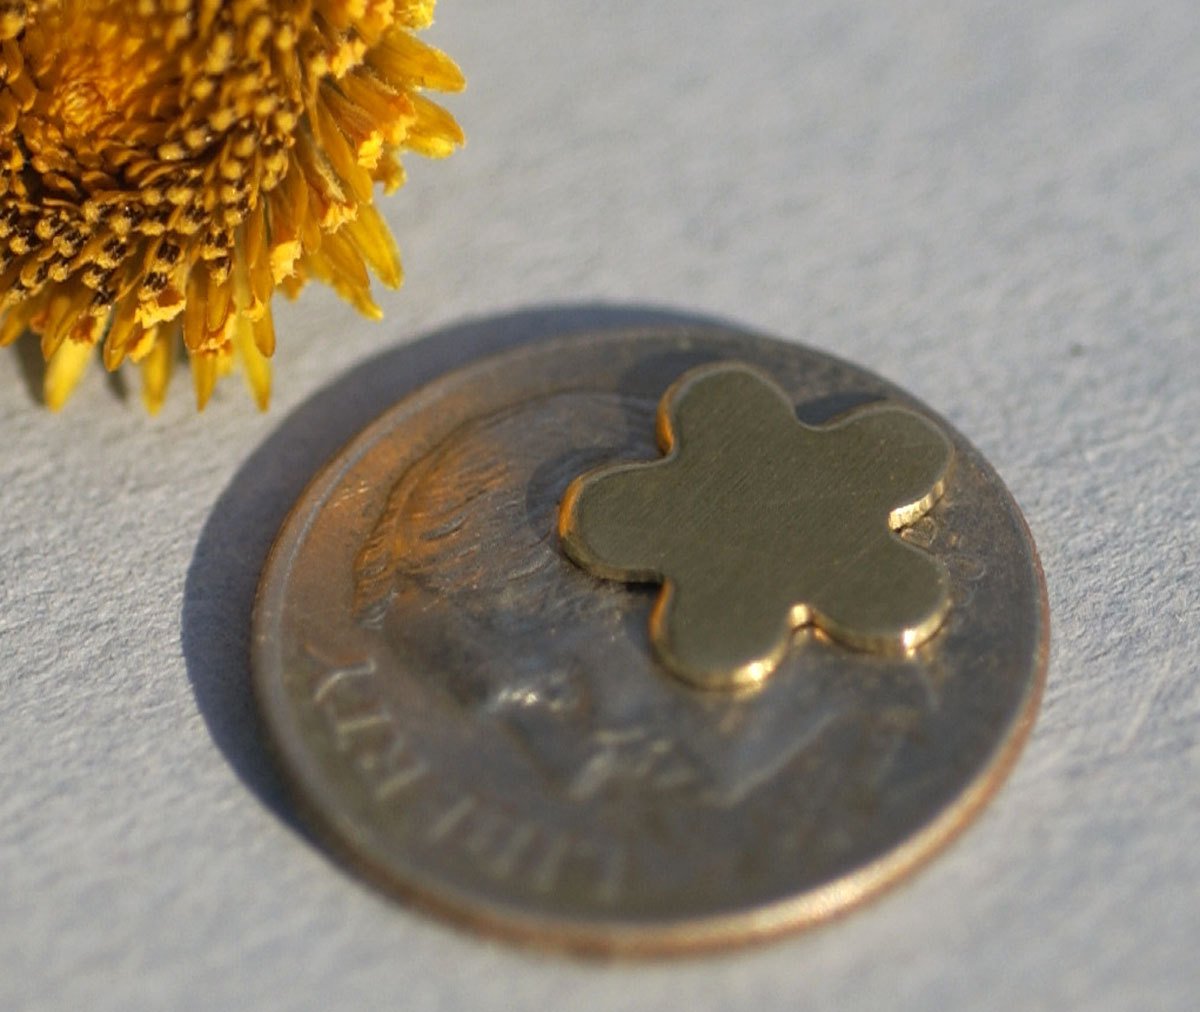 Bronze Blank Flower 9mm 20g Metalworking Cutout Blank Figure for Soldering Stamping Texturing Blanks - 8 pieces